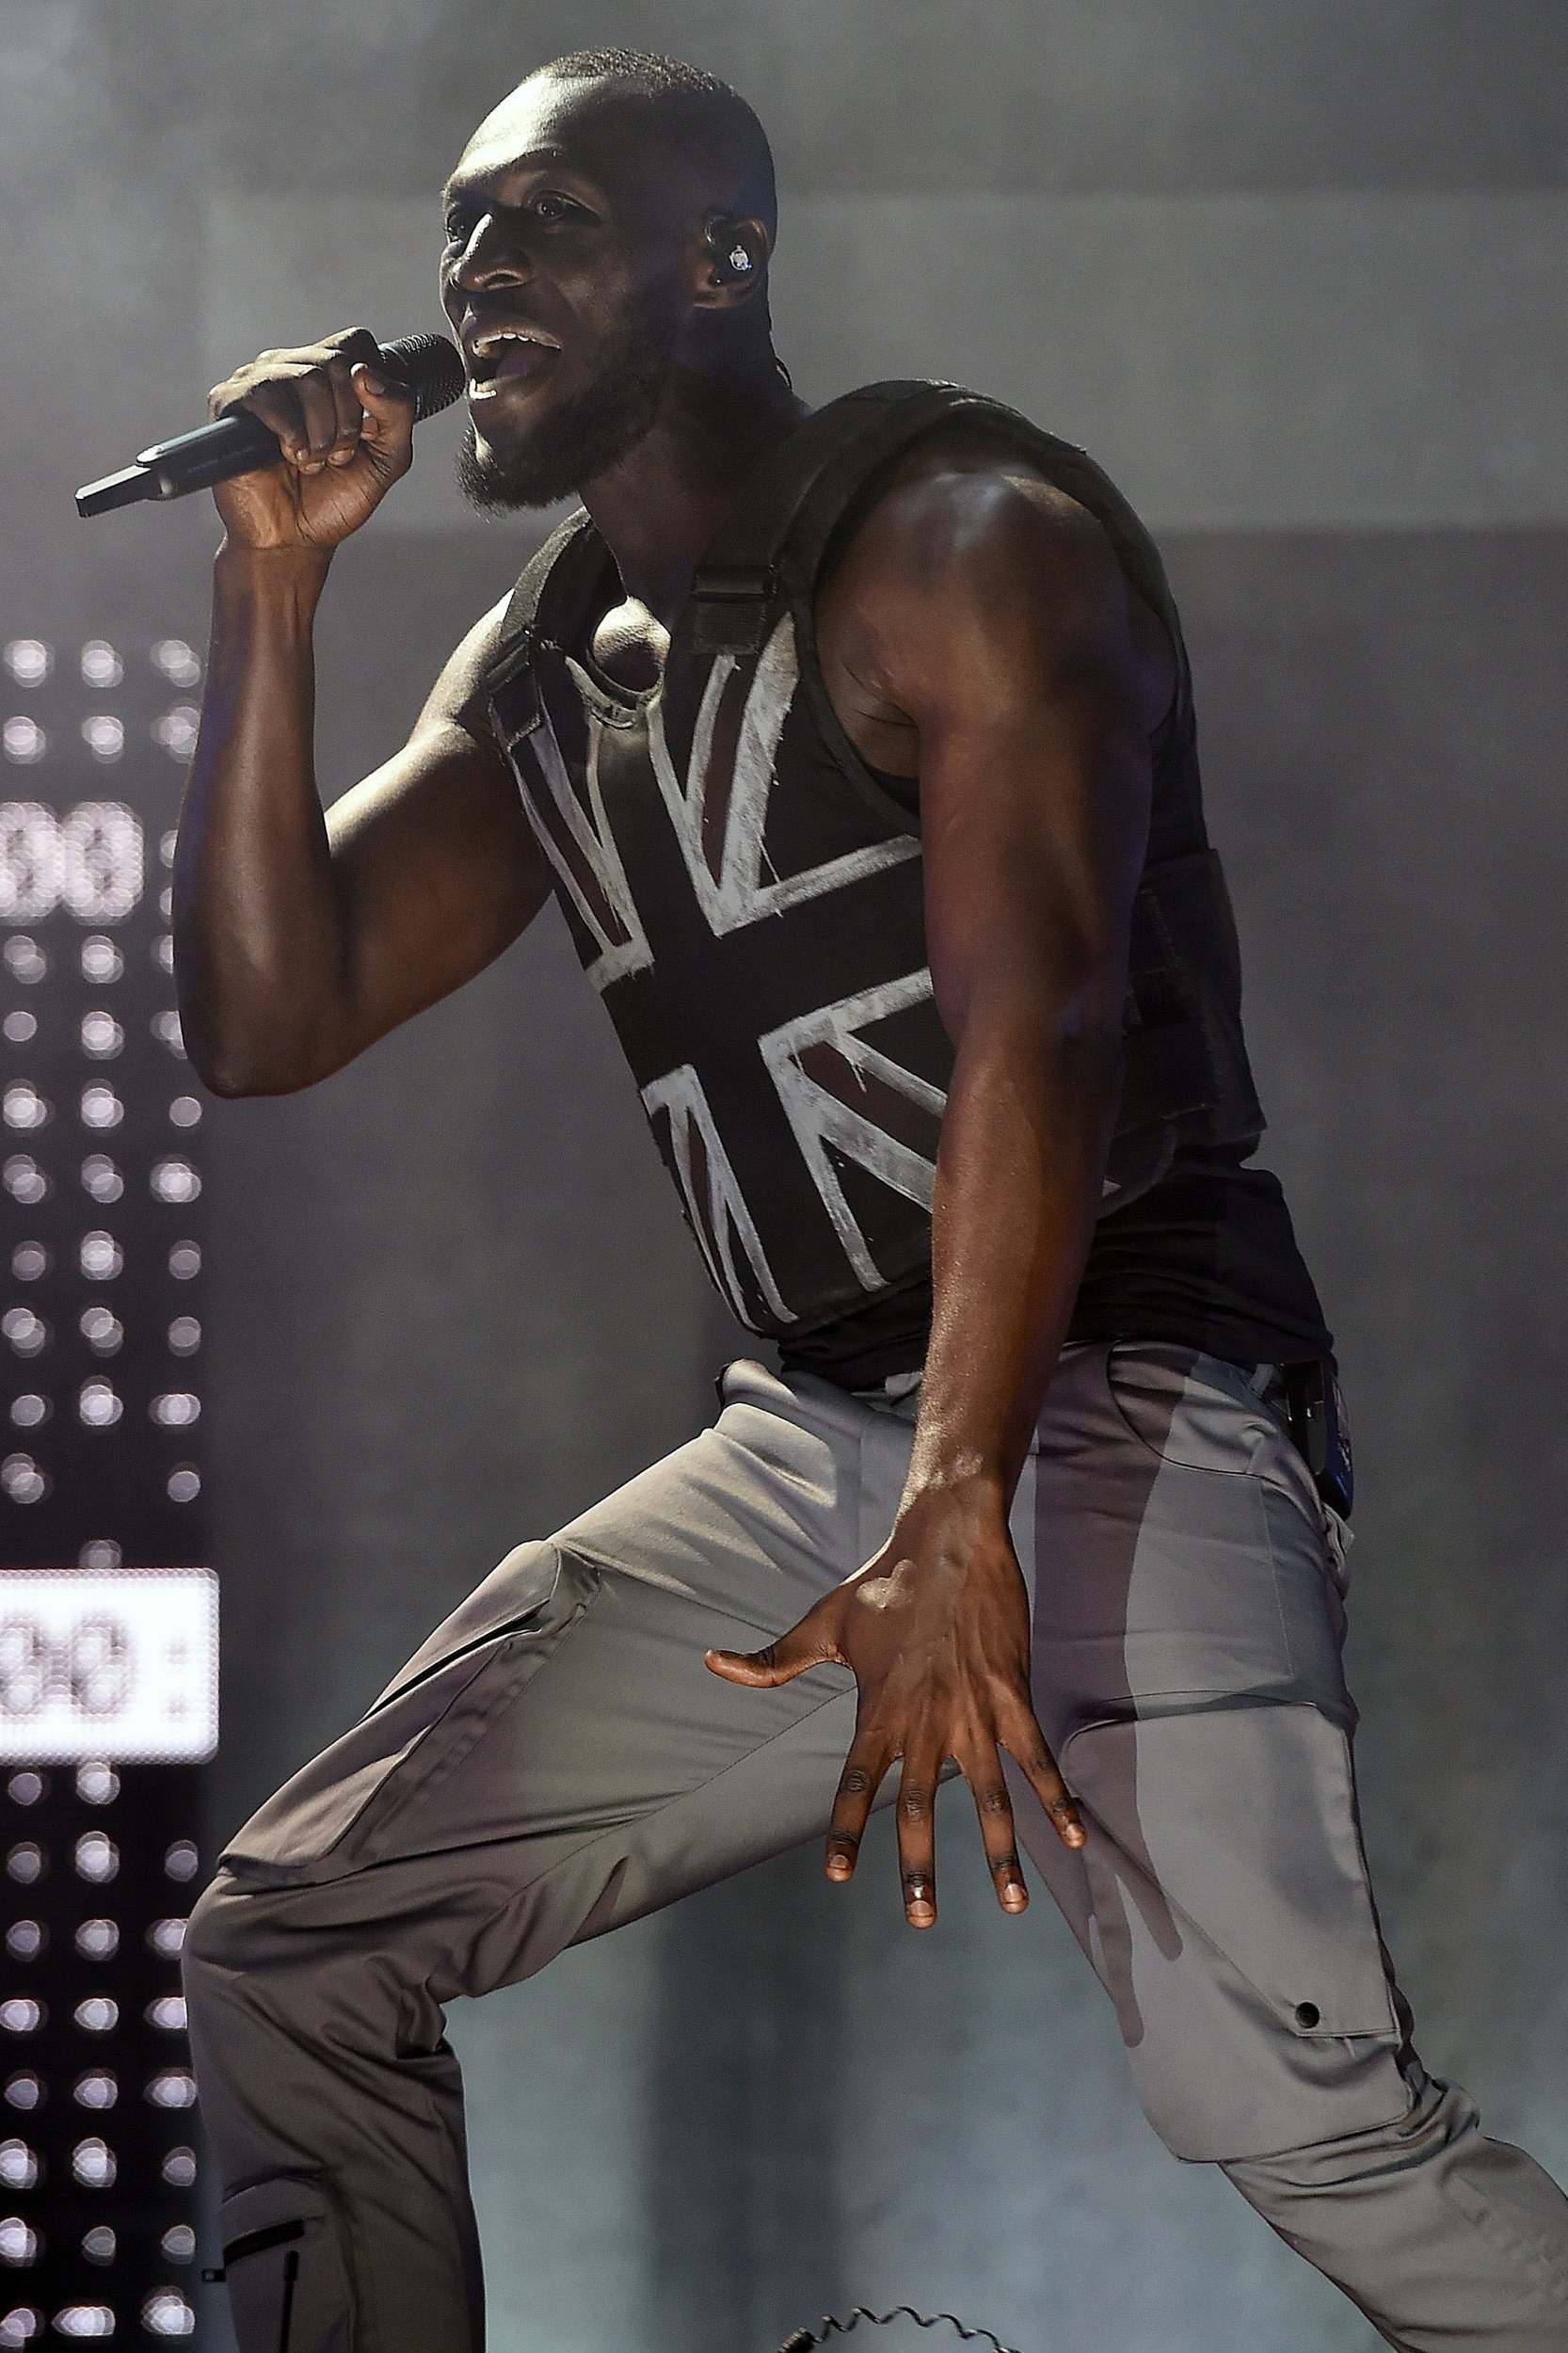 Rapper Stormzy hailed for making history